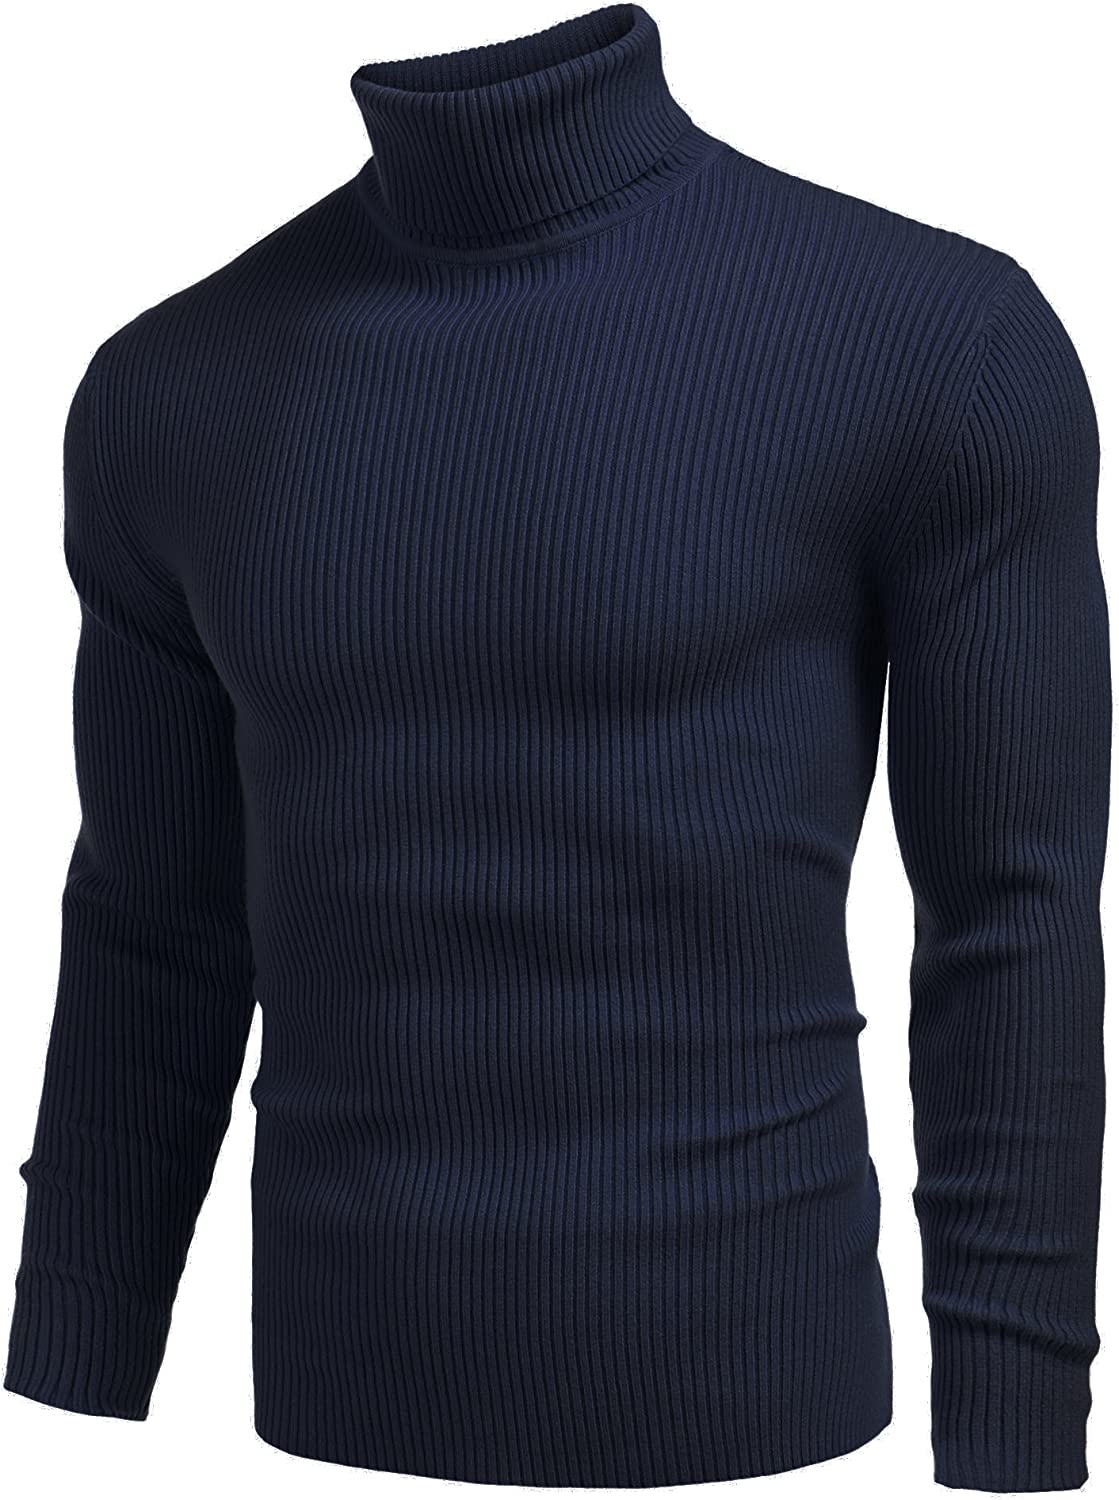 JINIDU Men's Thermal Ribbed Turtleneck Slim Fit Casual Knitted Pullover